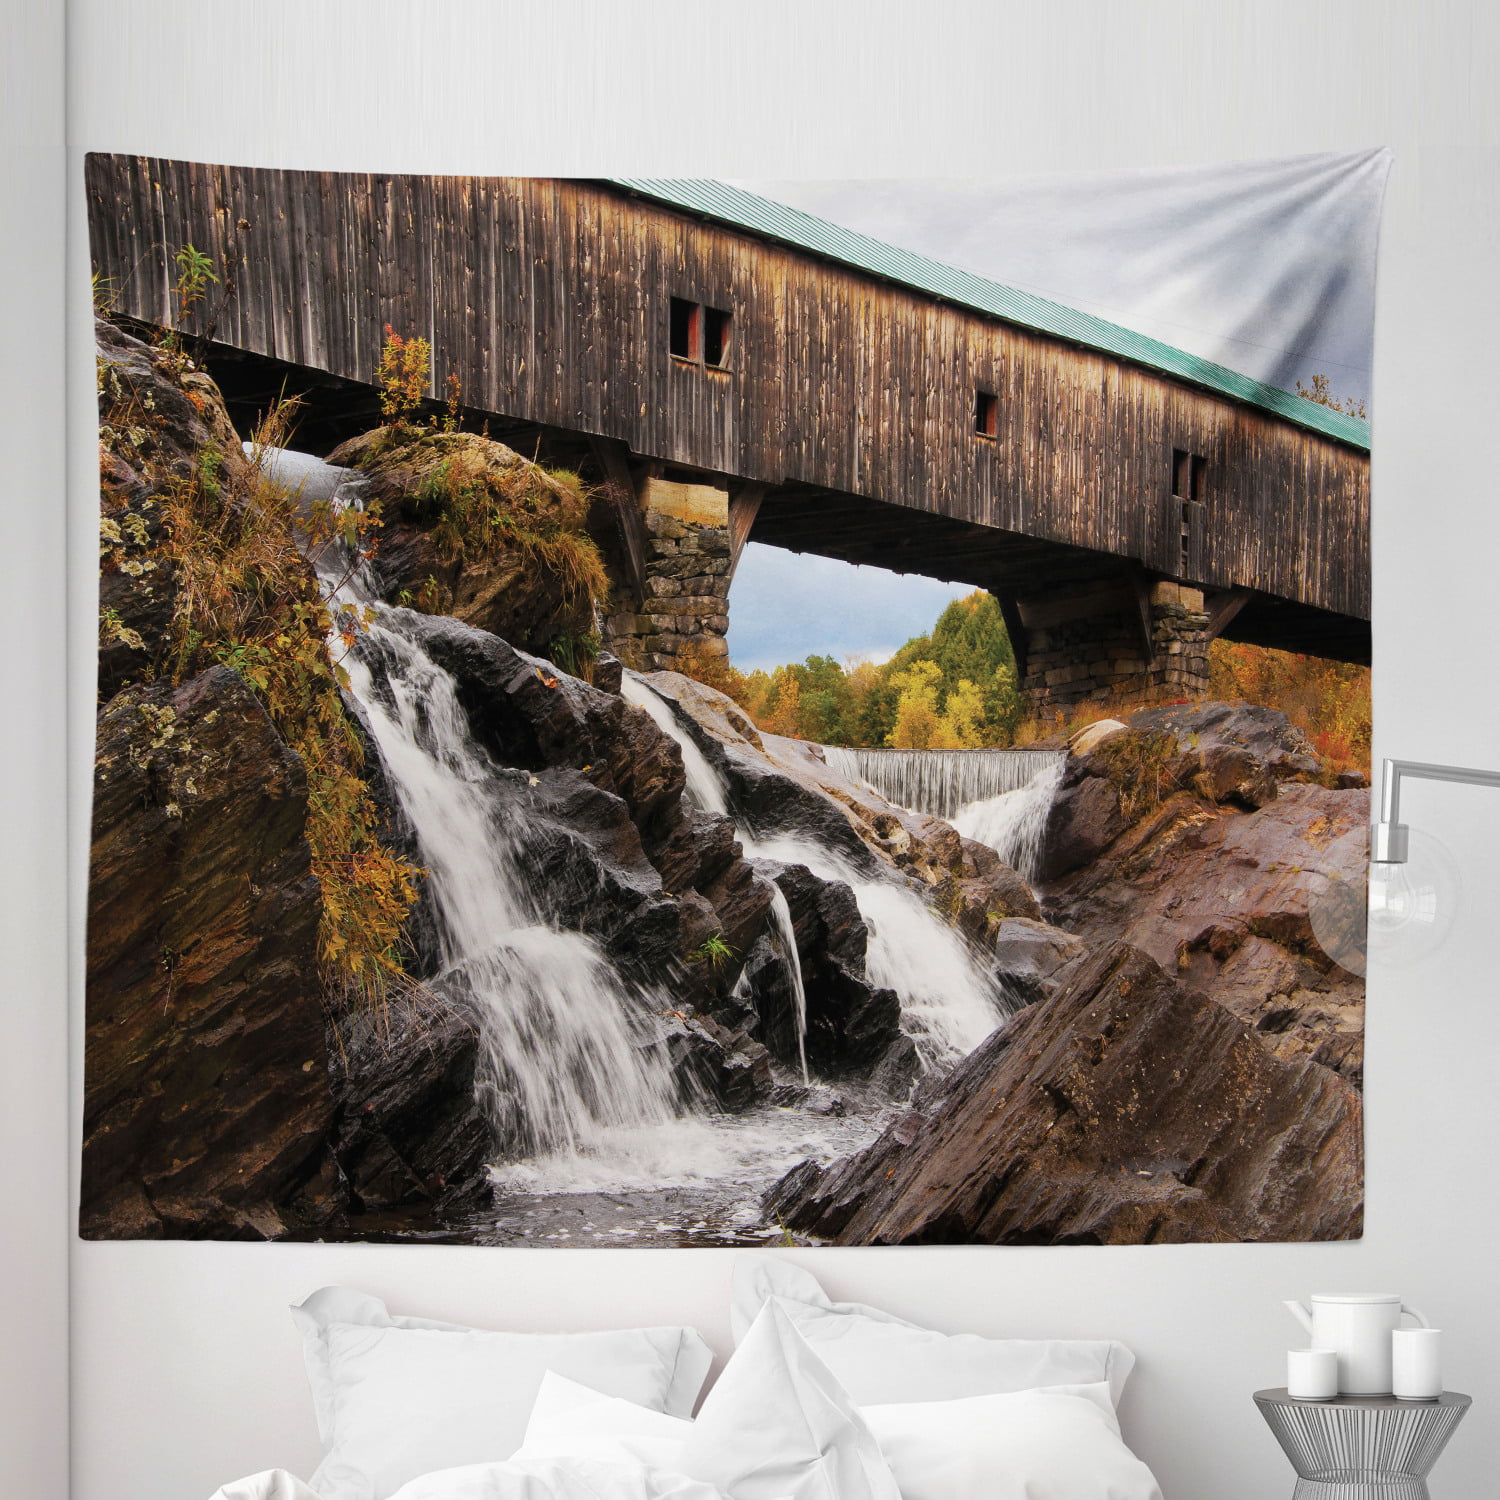 Modern luggage tag Apartment Decor Old Rustic Oak Covered Bridge Over Cascading Waterfalls Rock Fall Season American Cityscape Suitable for children and adults Brown W2.7 x L4.6